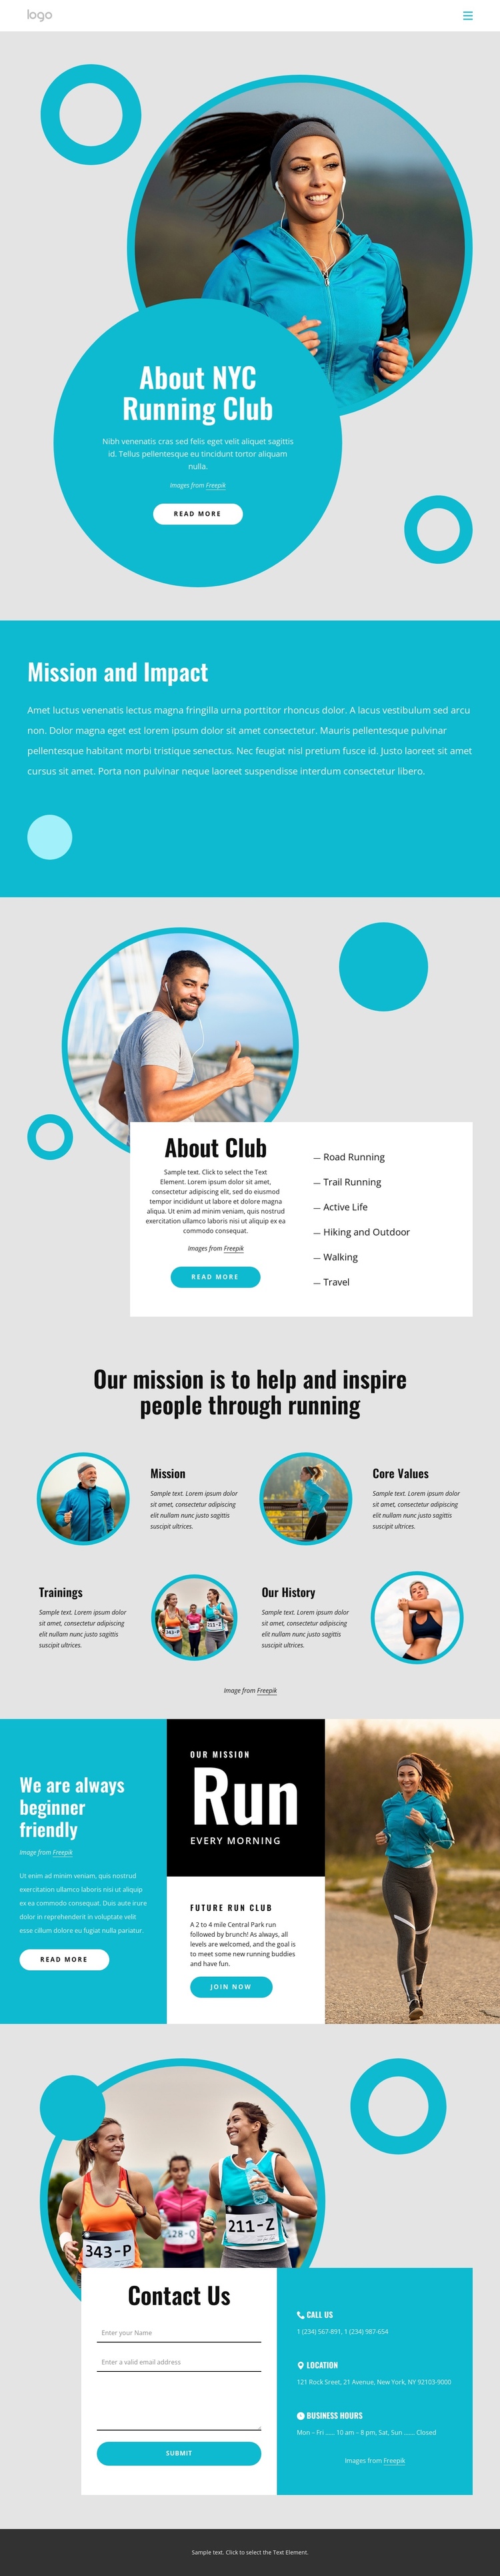 About NYC running club Website Builder Software